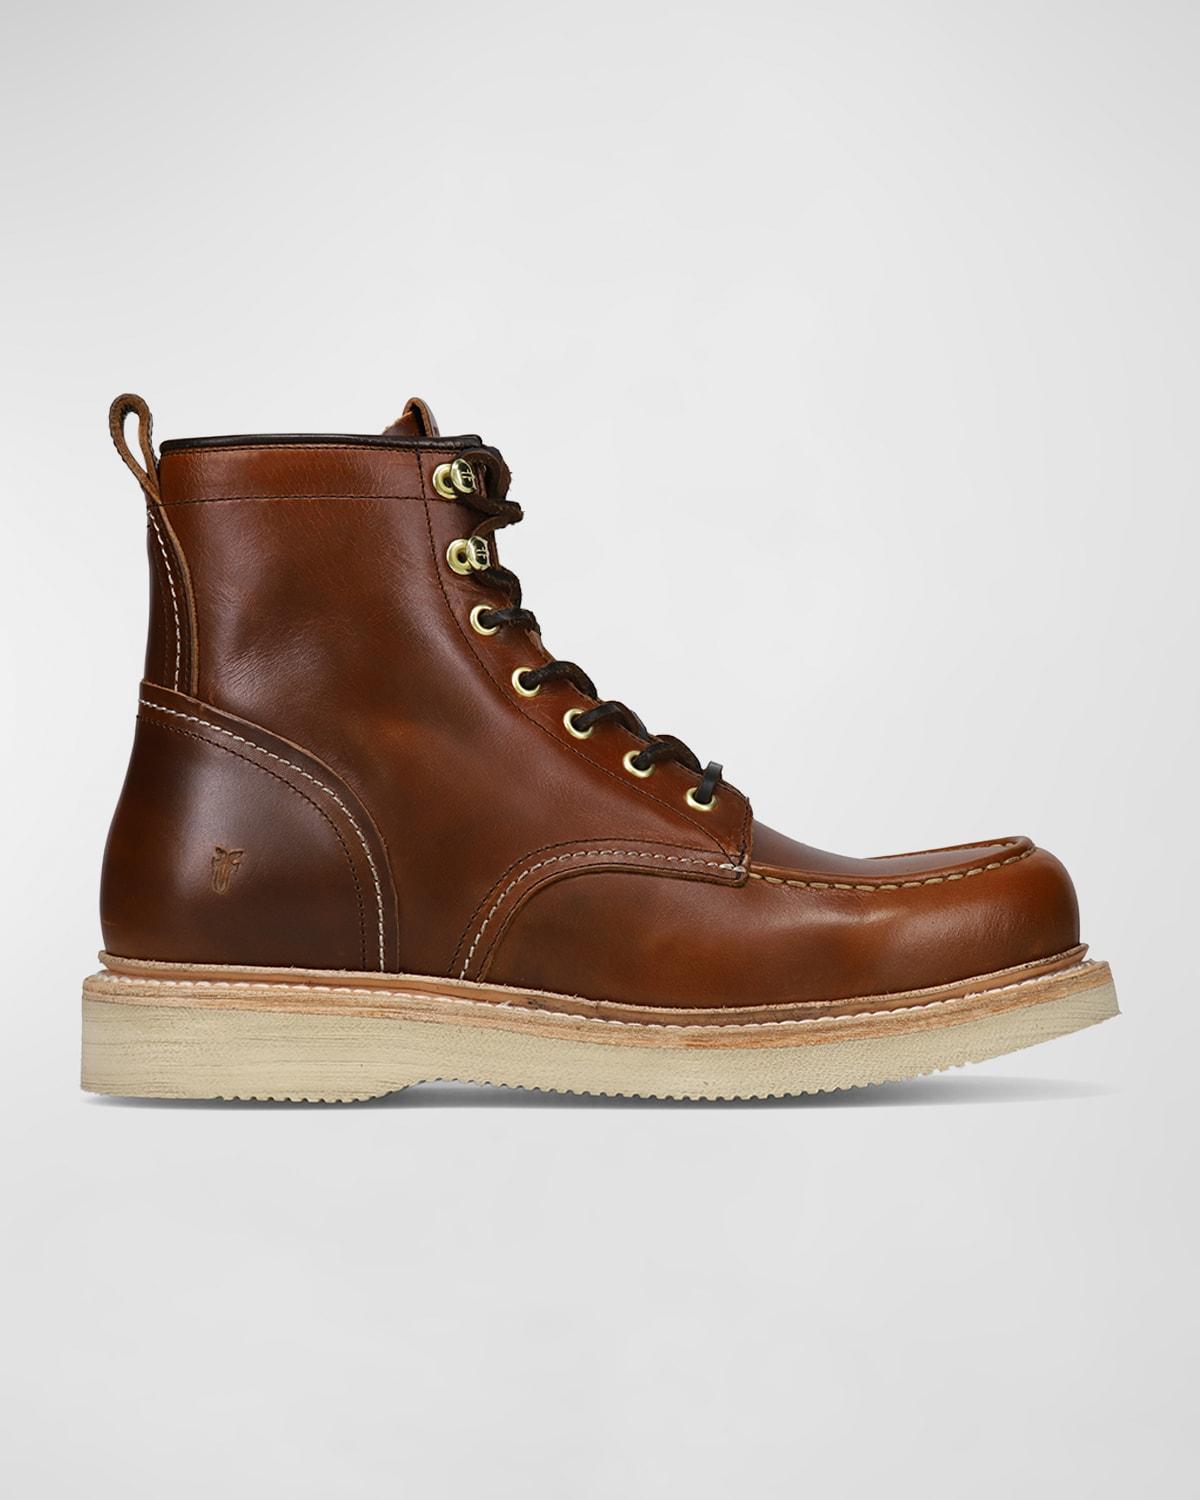 Frye Mens Hudson Leather Wedge Work Boots Product Image